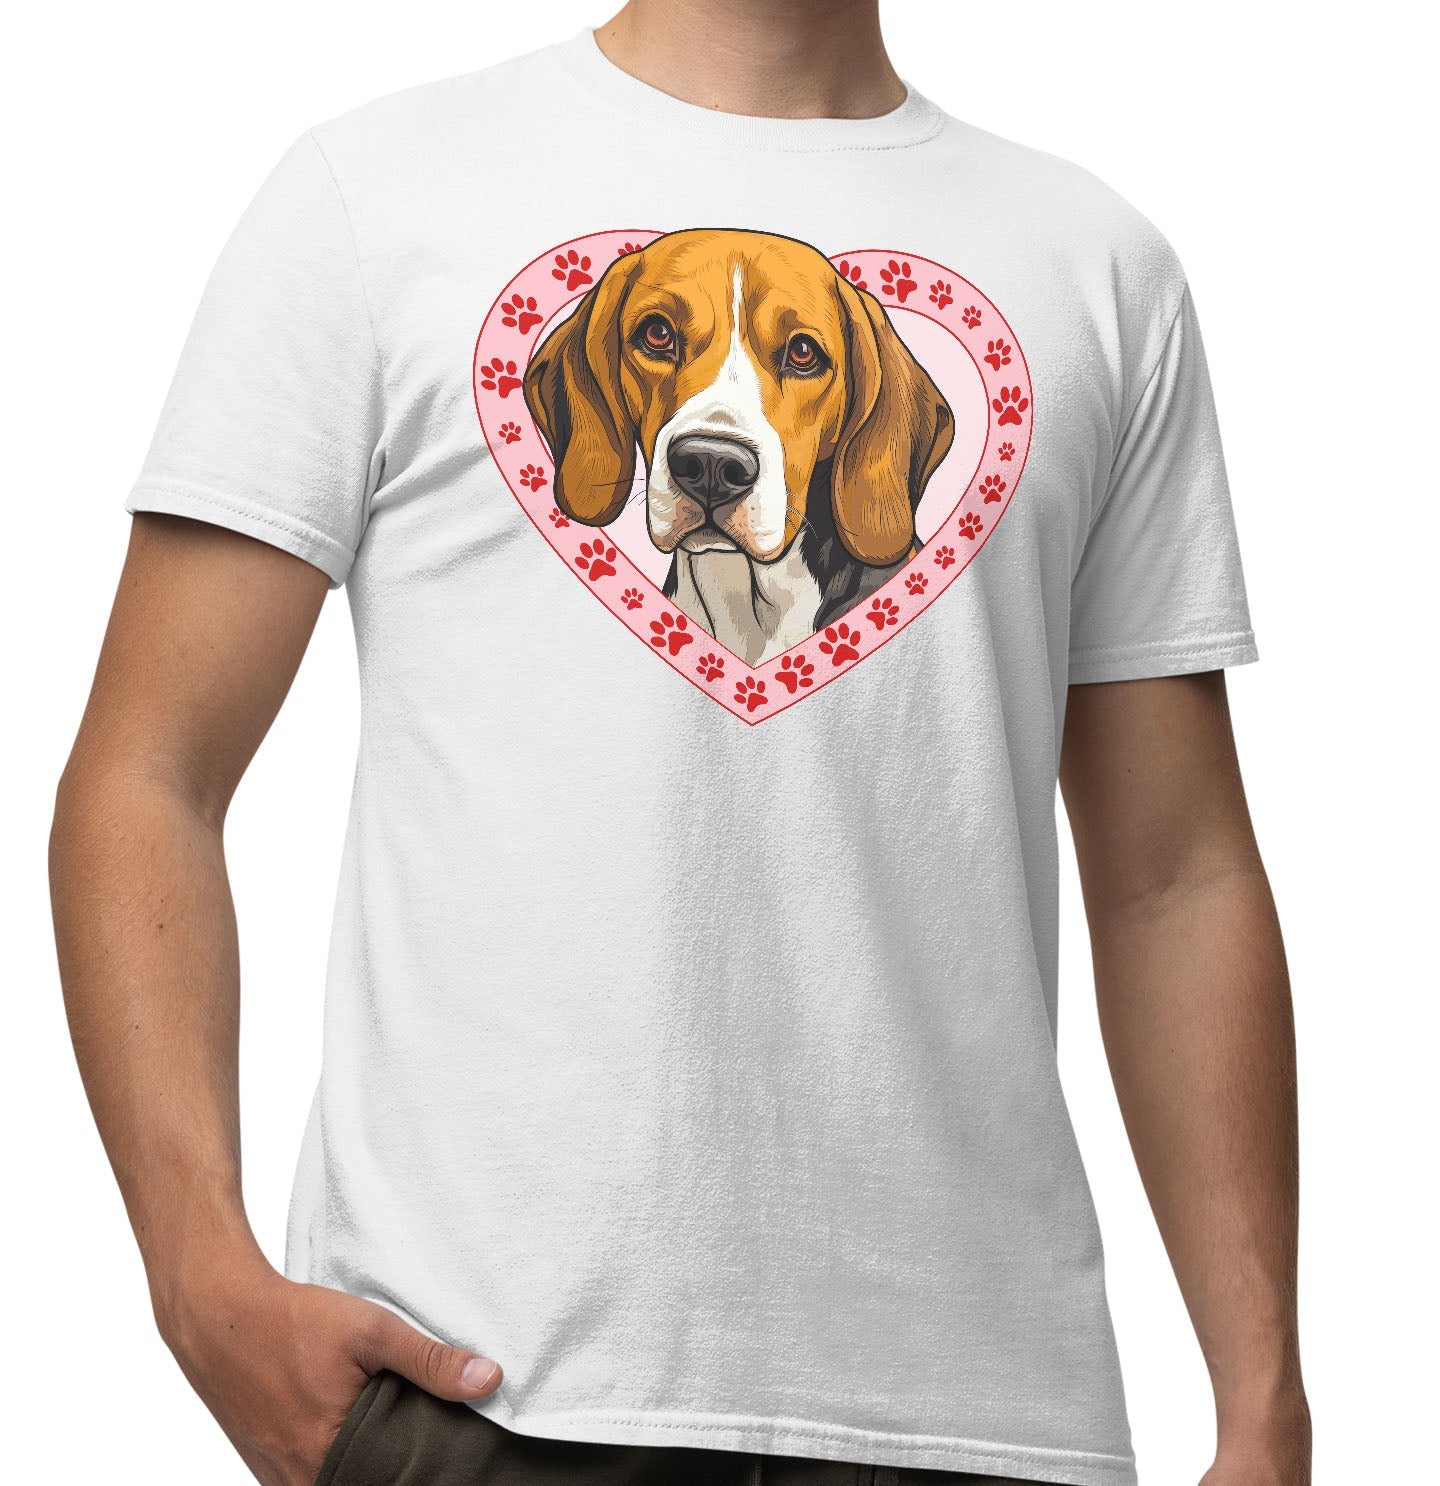 English Foxhound Illustration In Heart - Adult Unisex T-Shirt